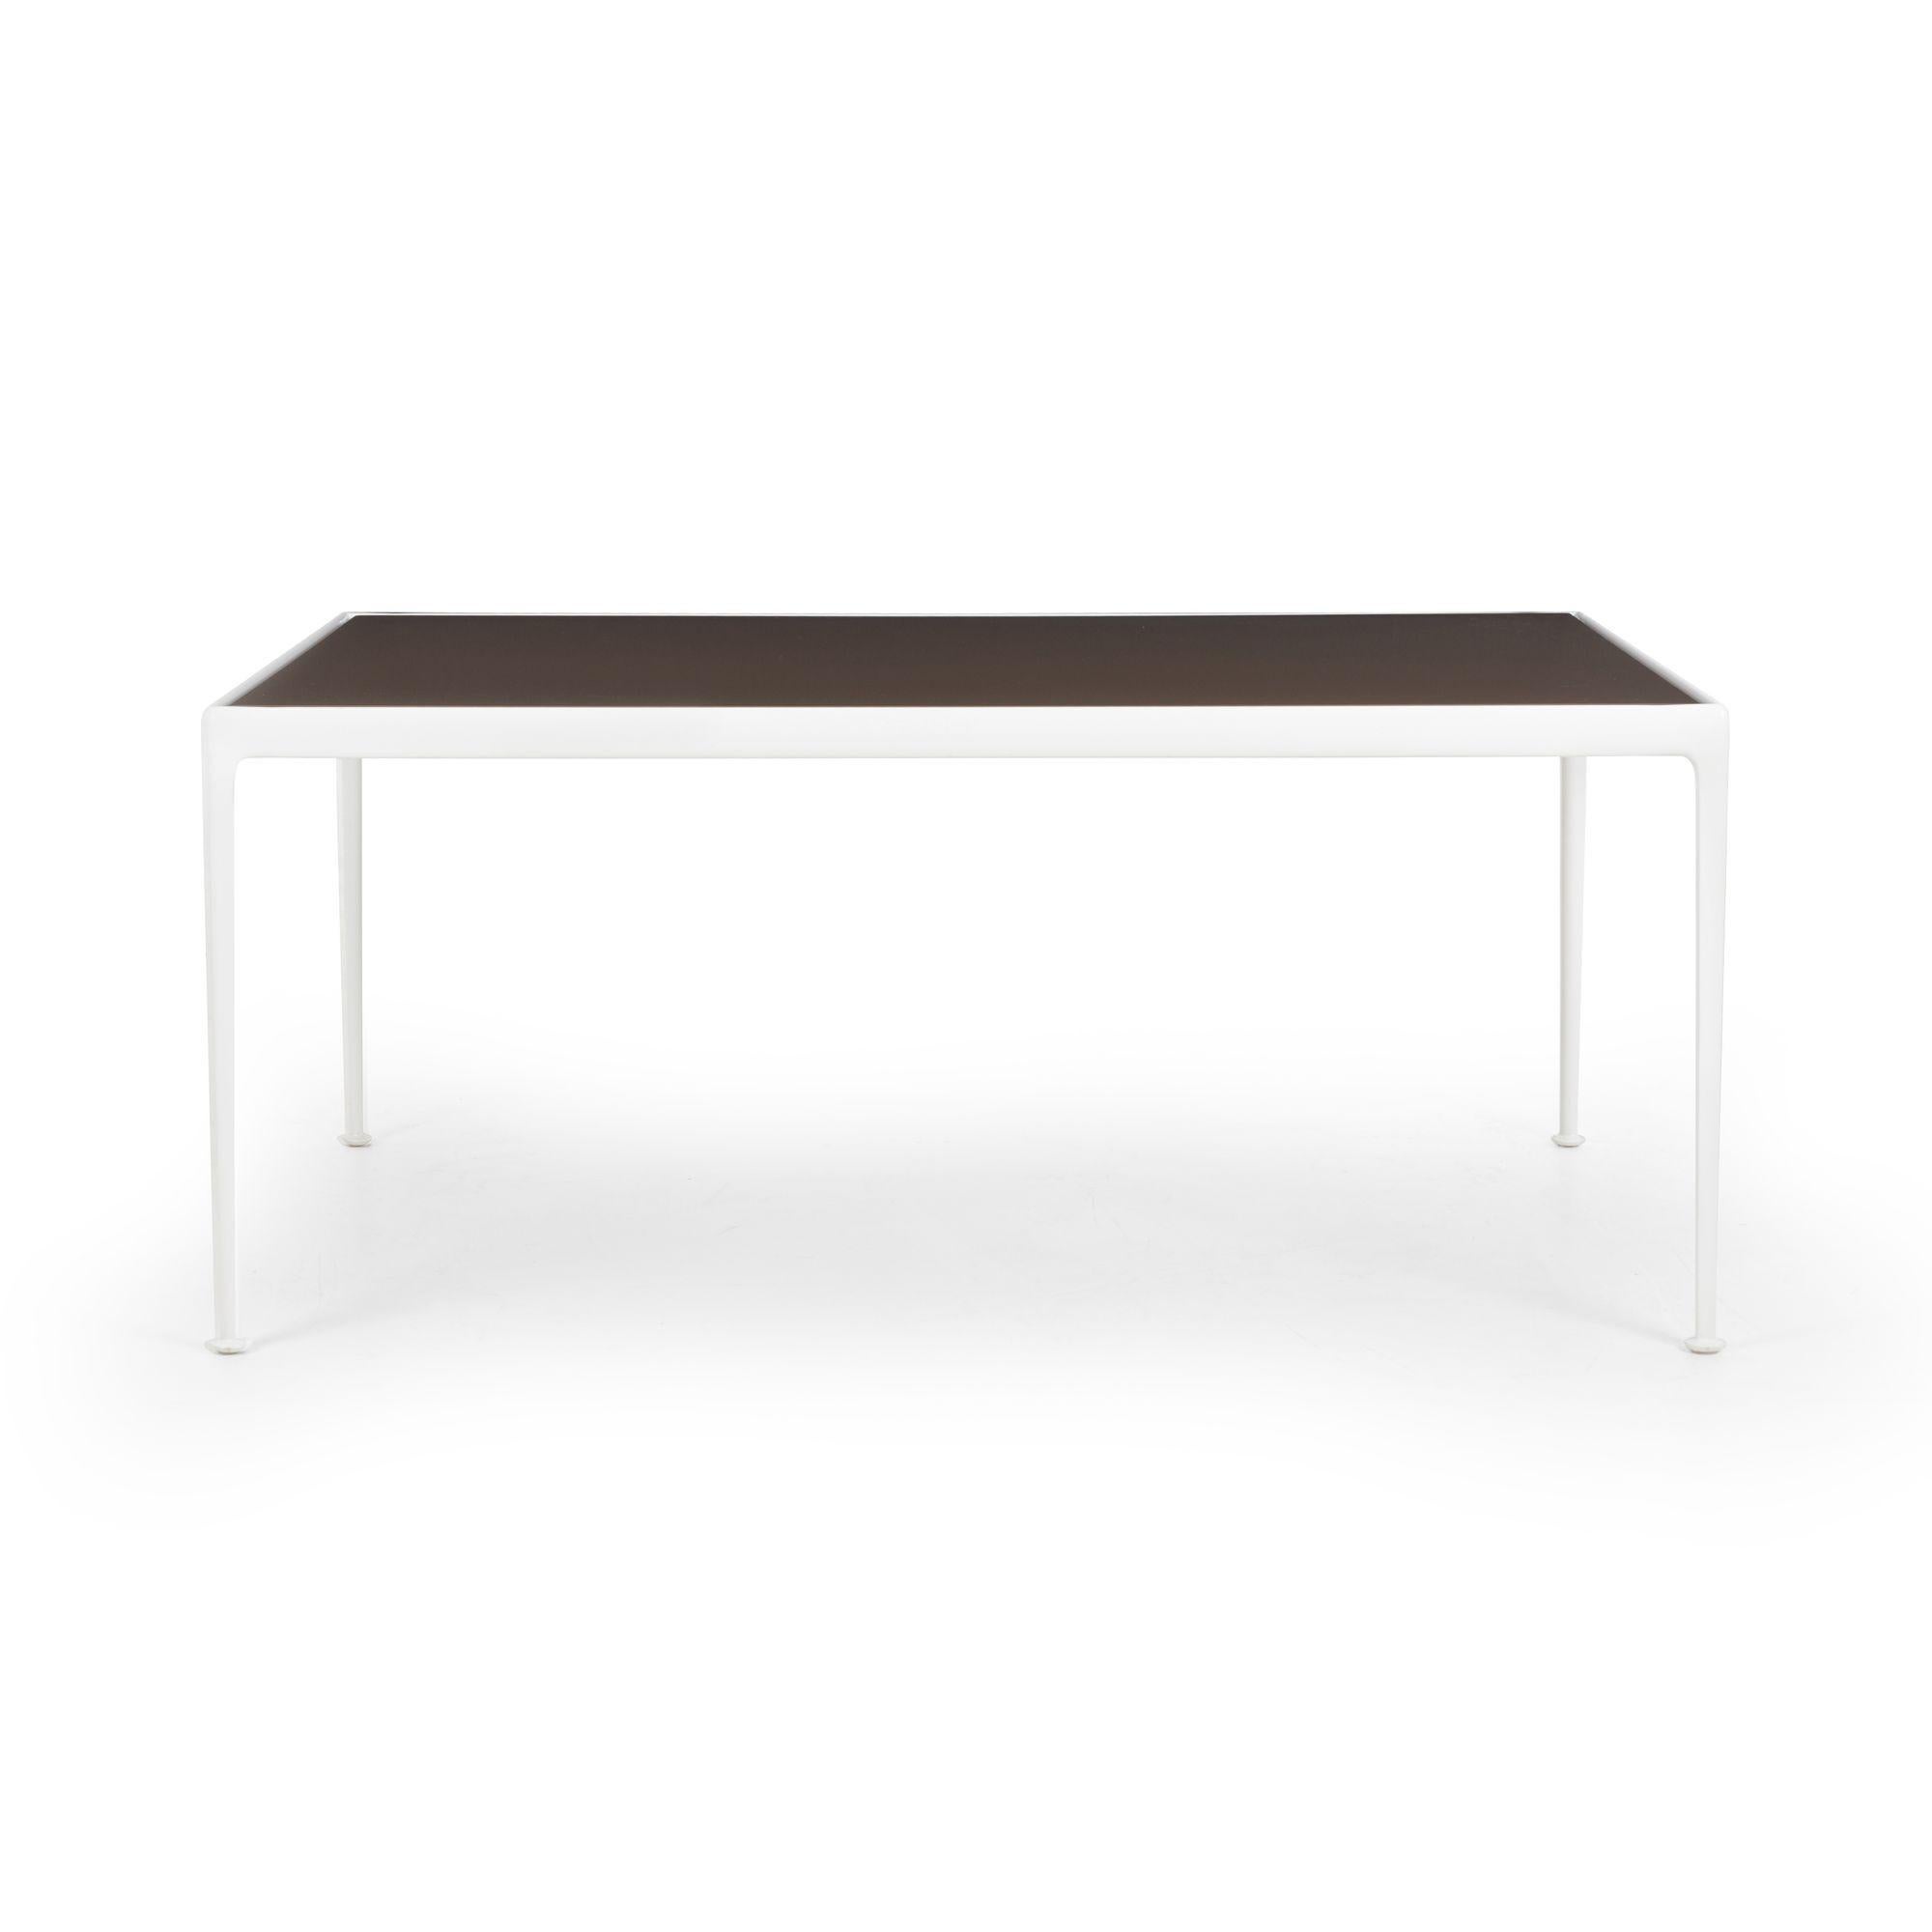 Aluminum Early Richard Schultz Leisure Dining Table For Sale